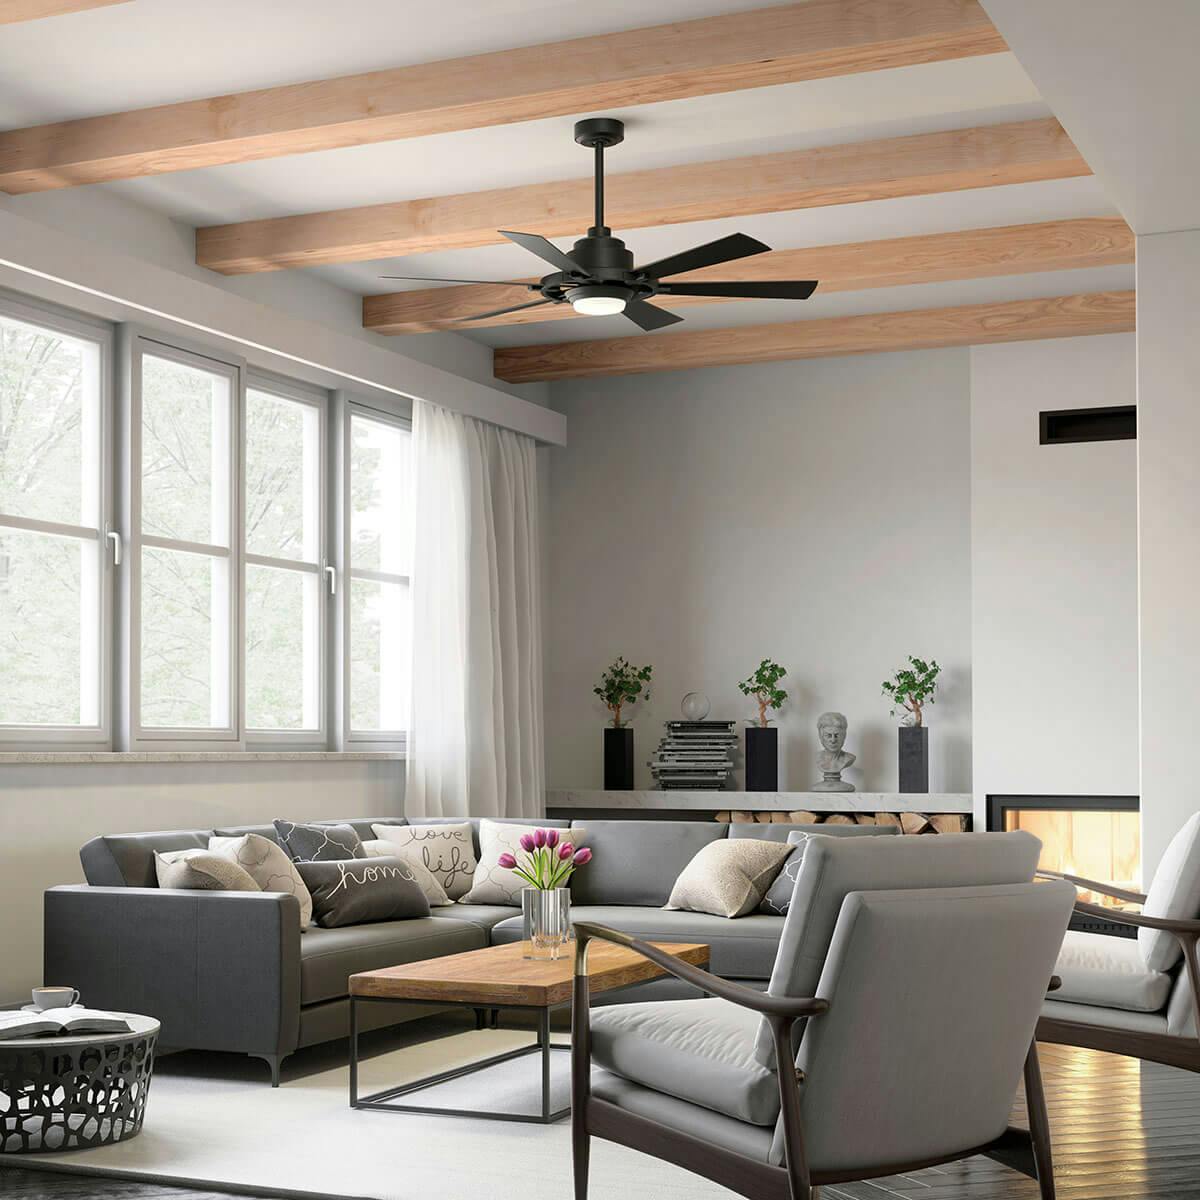 Day time living room image featuring Iras ceiling fan 300241DBK